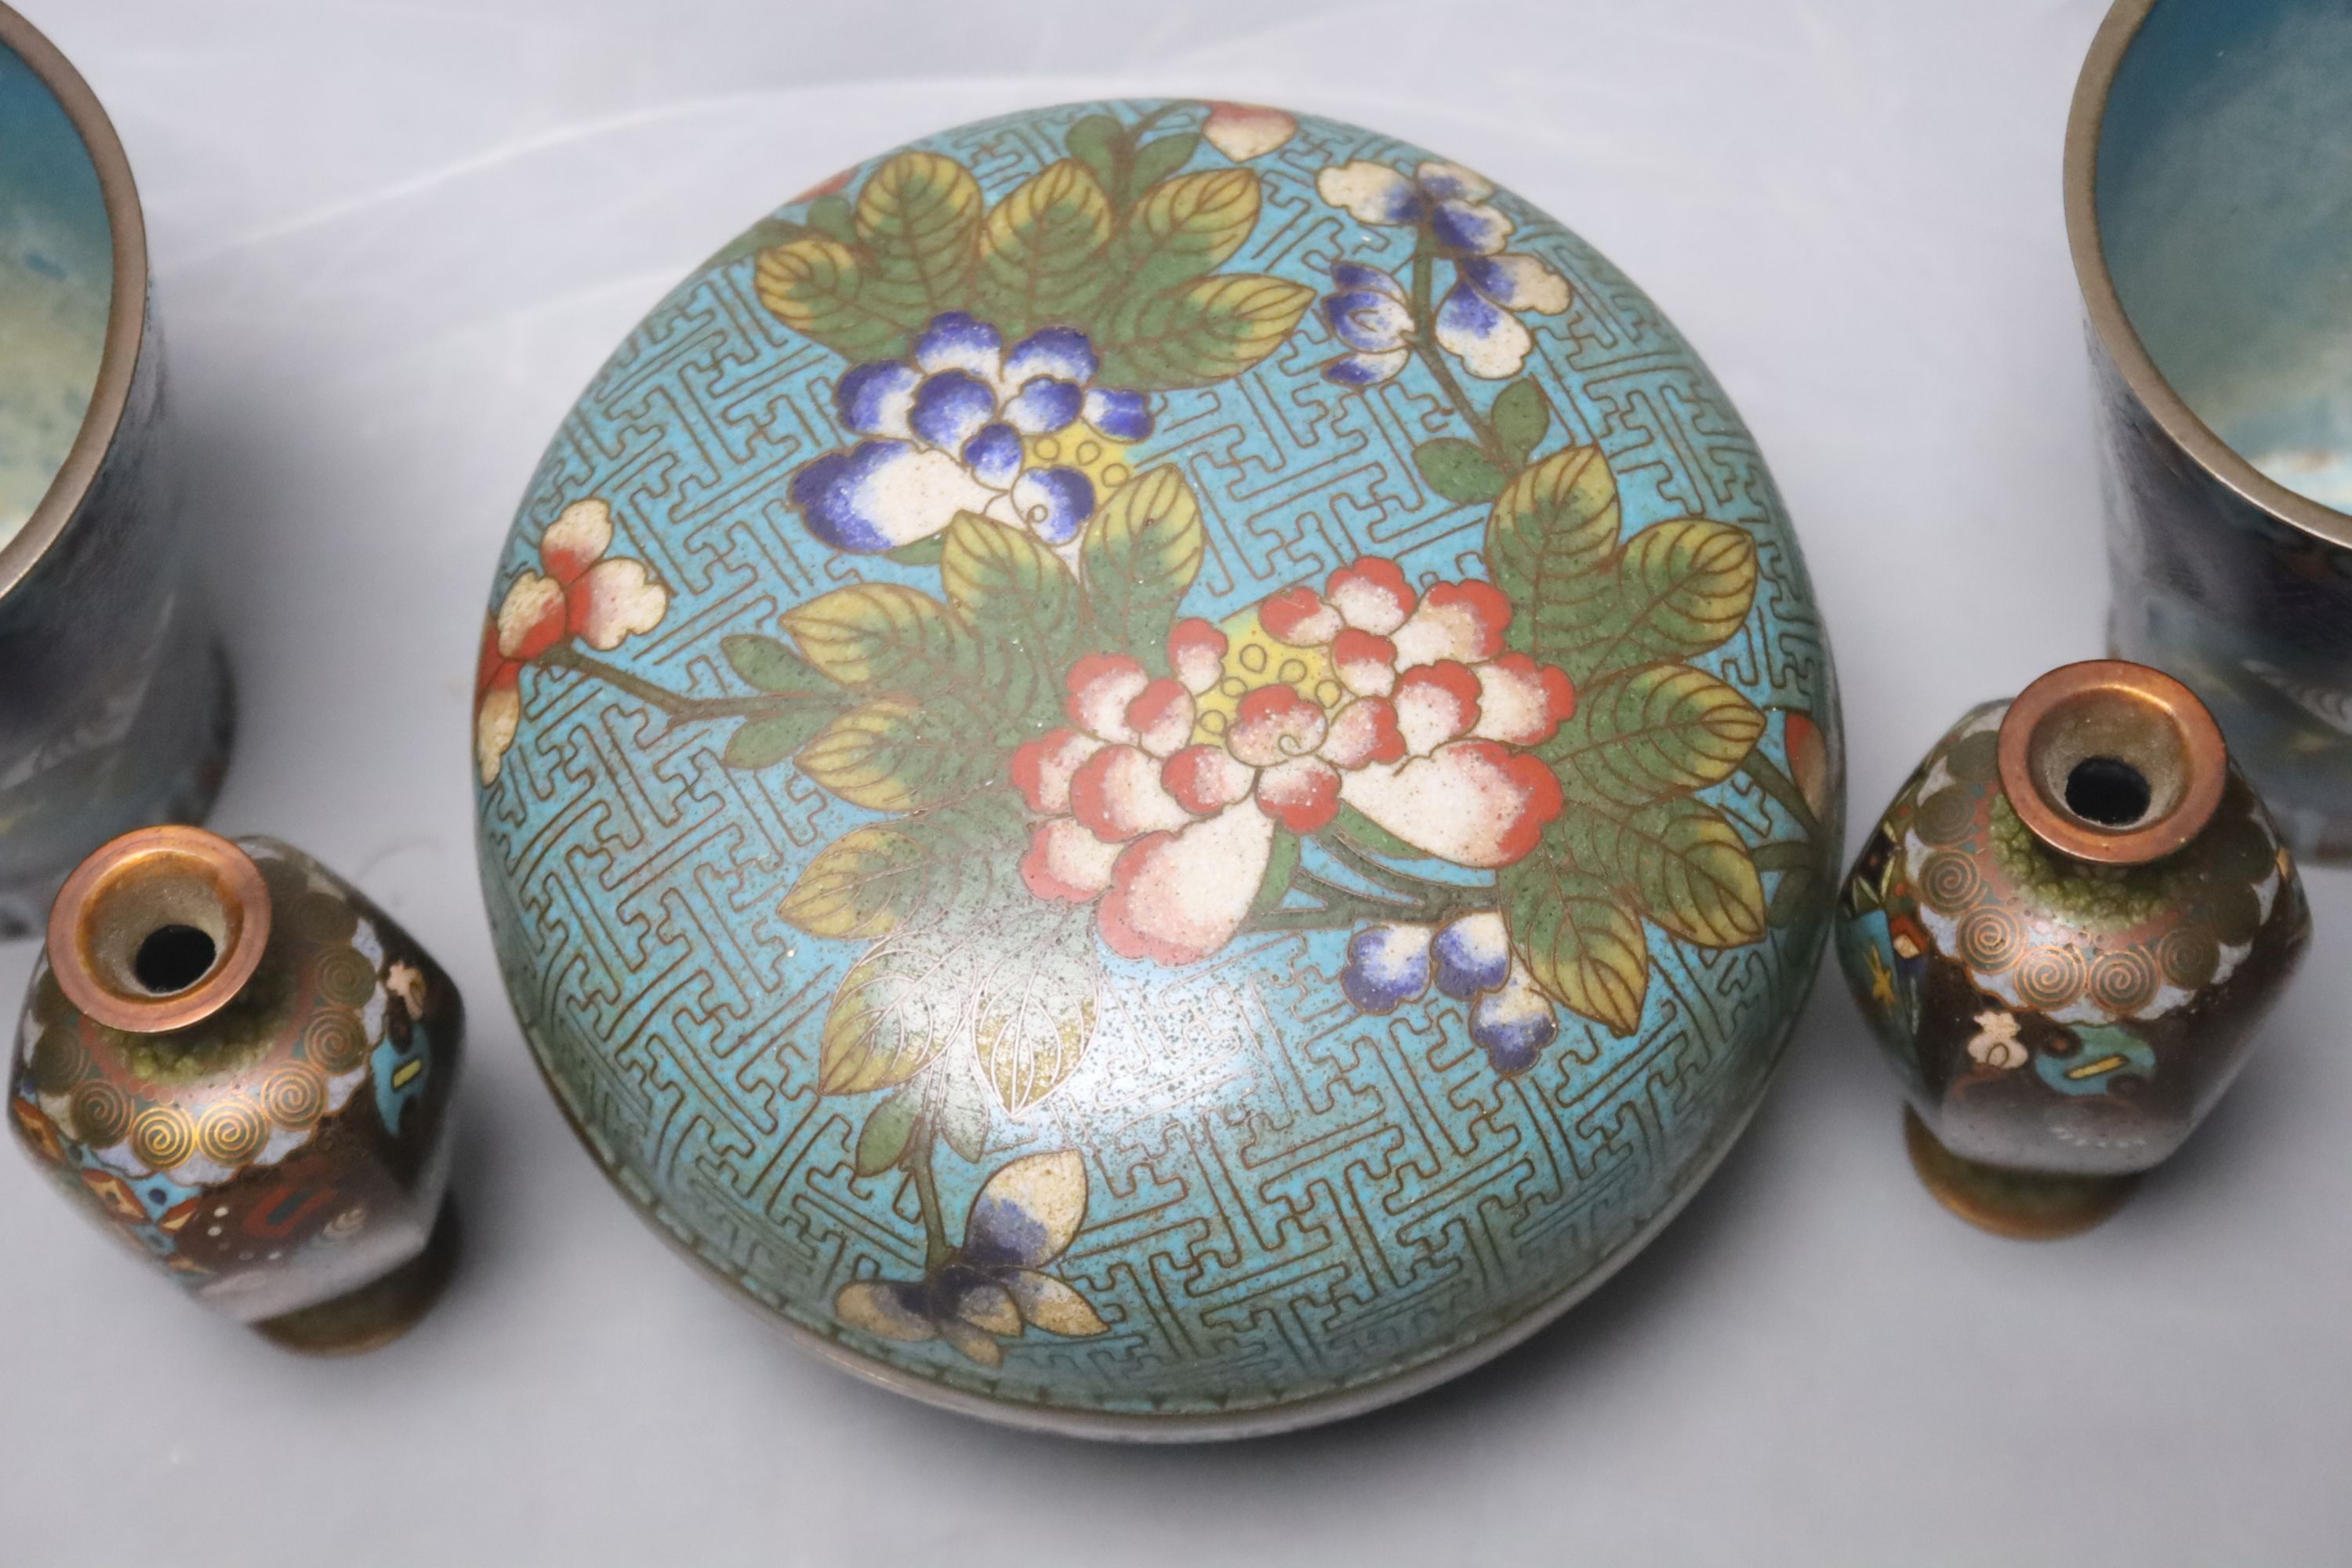 A Chinese cloisonne enamel box & cover, two beakers and four similar Japanese miniature vessels